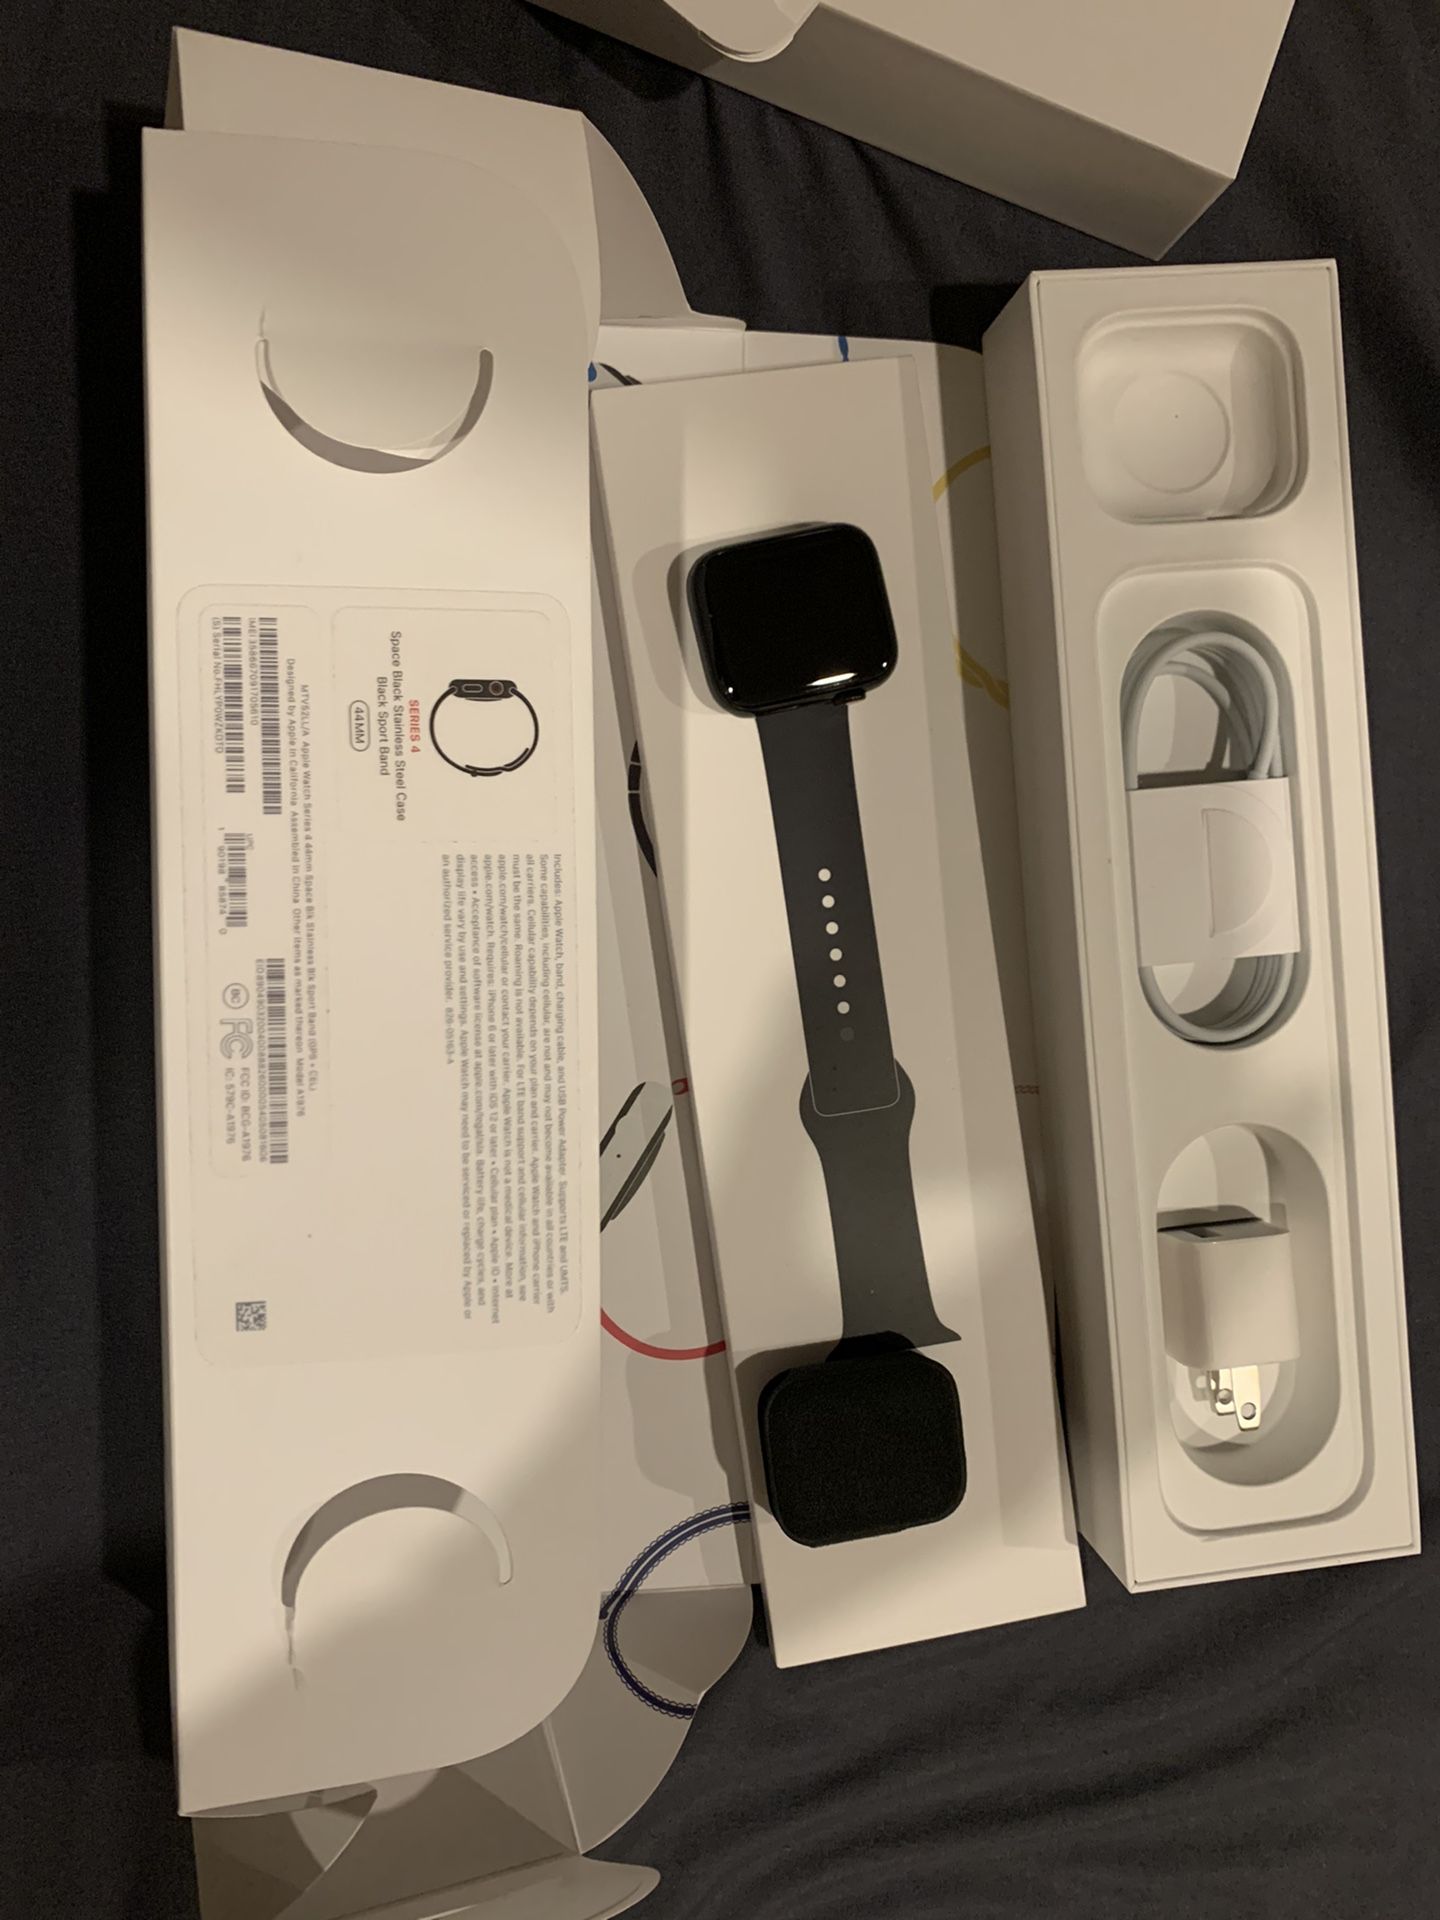 New Apple Watch 4 Stainless Steel 44mm Cellular Unlocked Meet @ Police Station